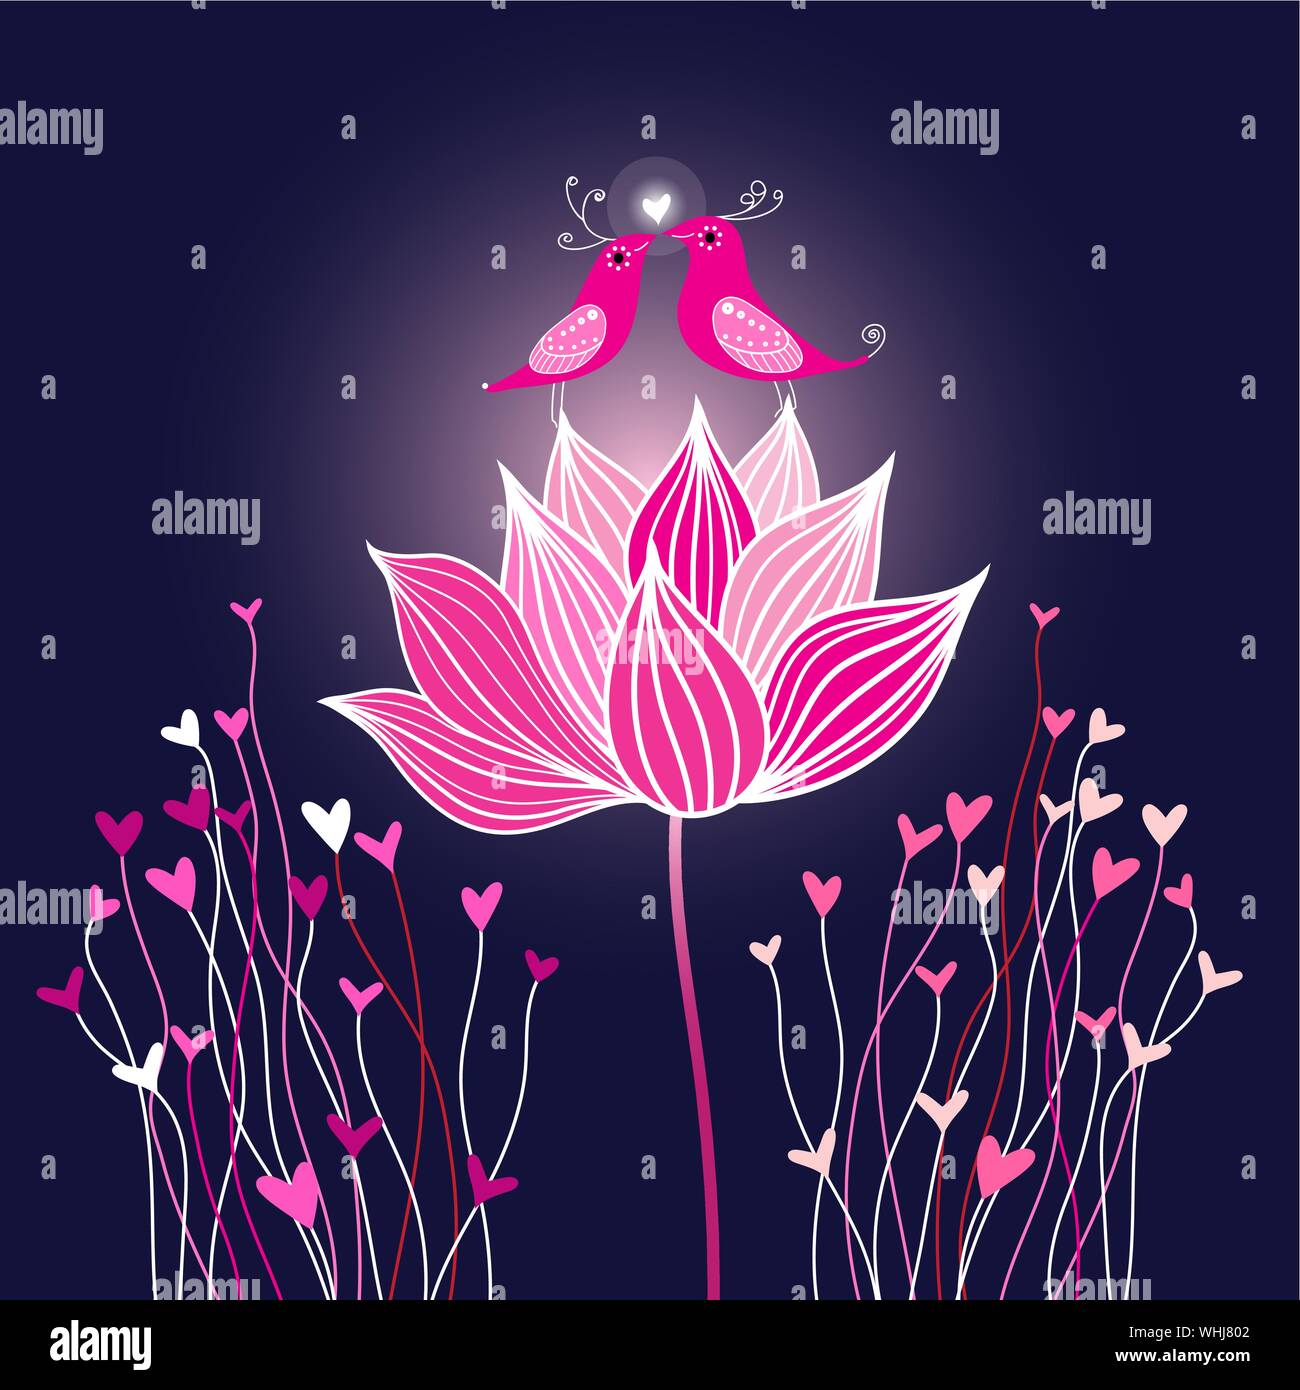 Graphic birds in love on a lotus on a dark background with hearts. Holiday card as Valentine's Day. Stock Vector